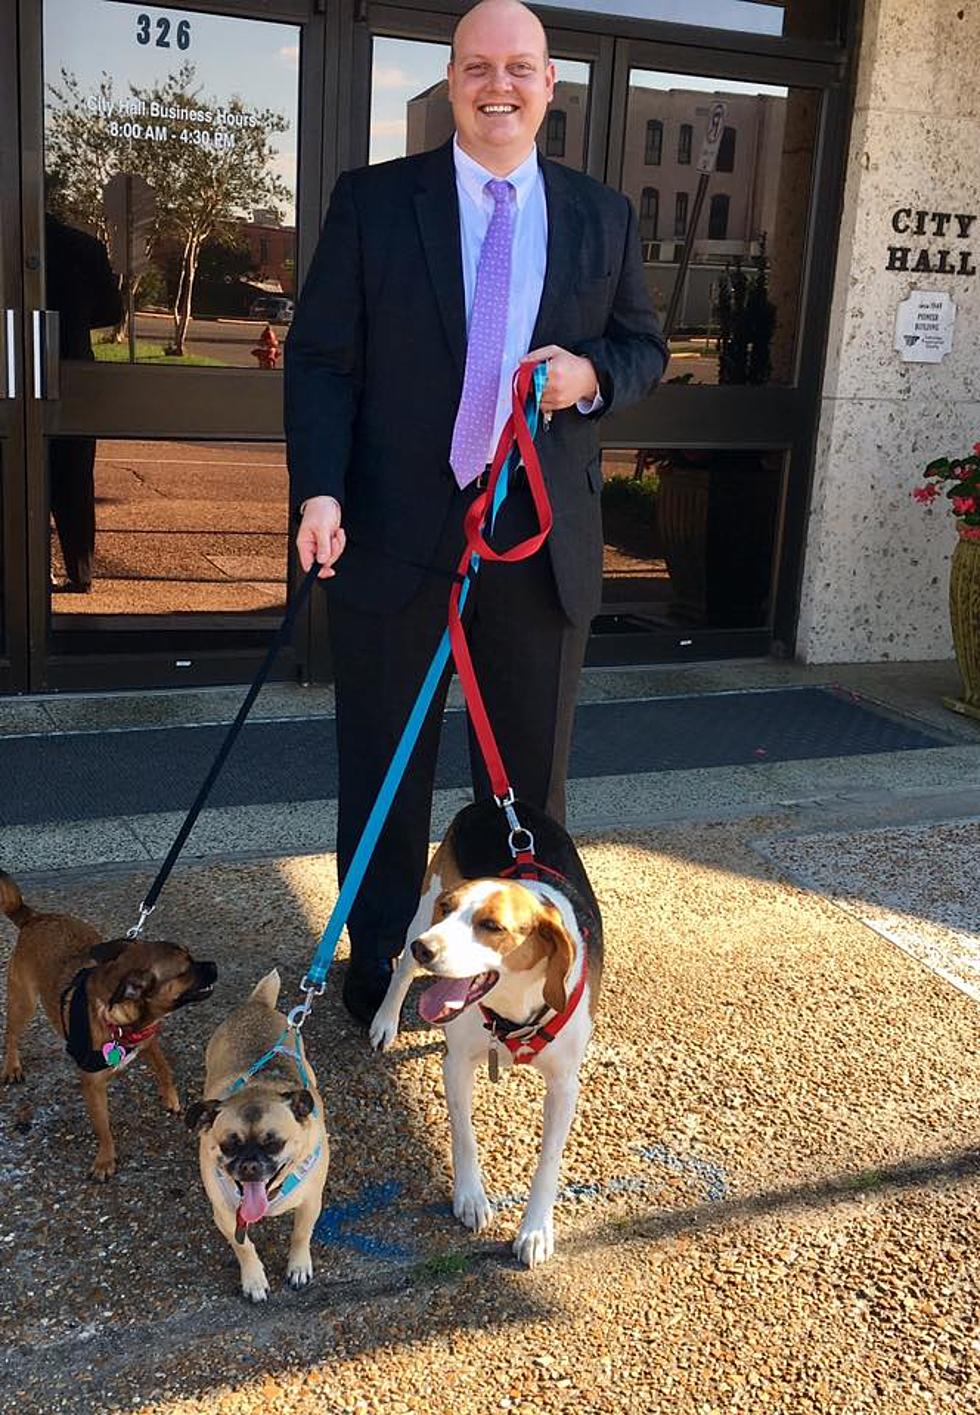 Celebrate Mayor-Elect Nic Hunter’s Inauguration And Help Animal Rescues!